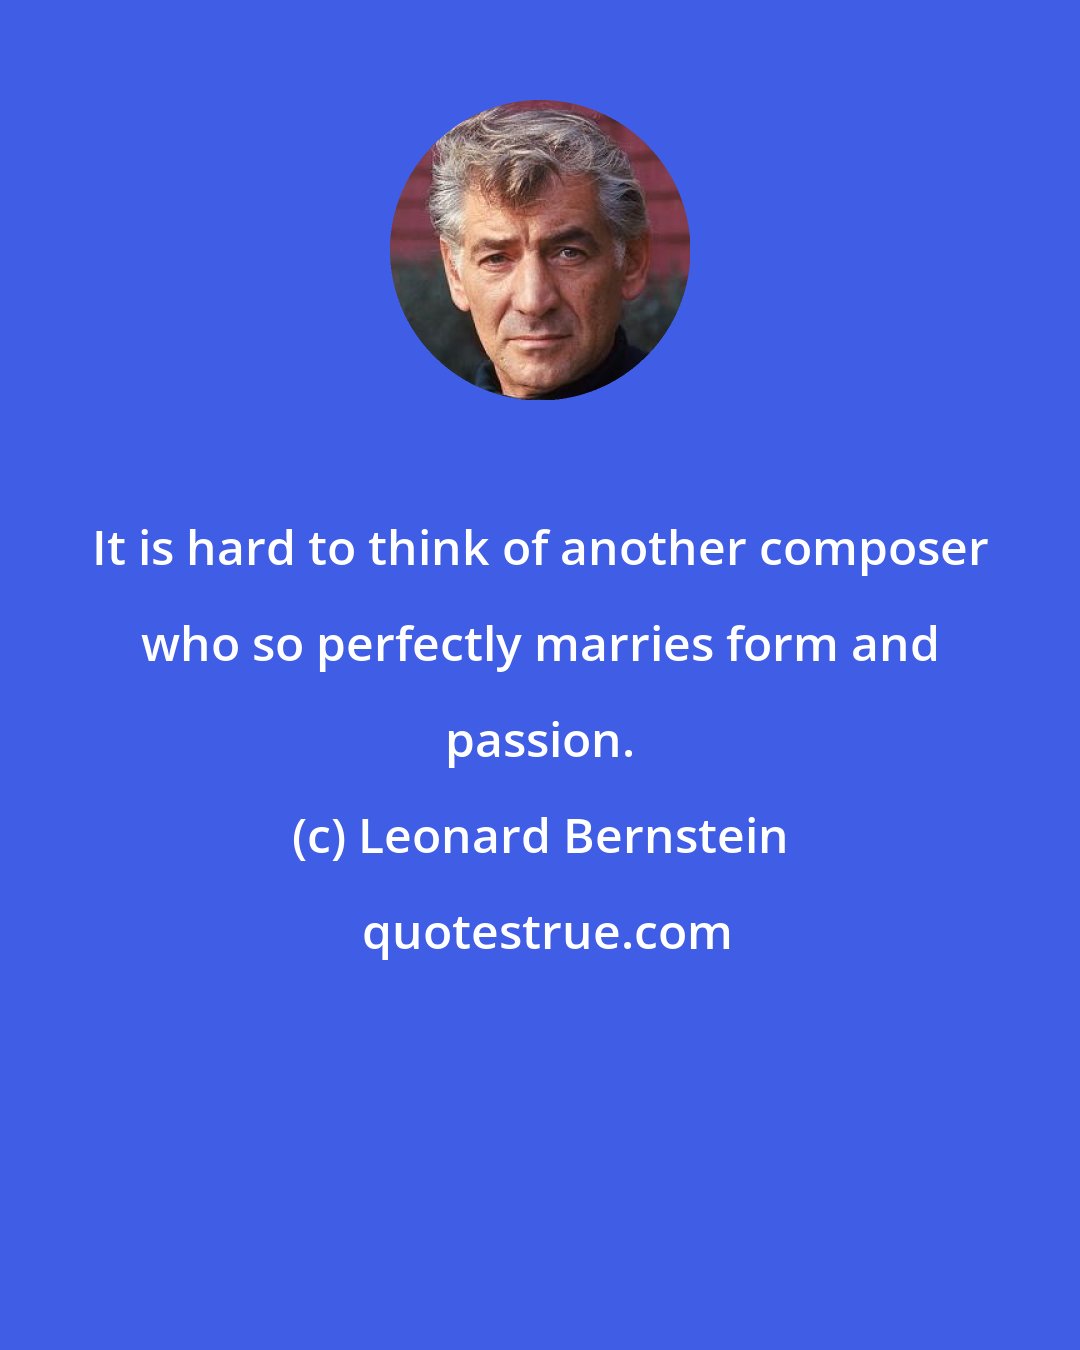 Leonard Bernstein: It is hard to think of another composer who so perfectly marries form and passion.